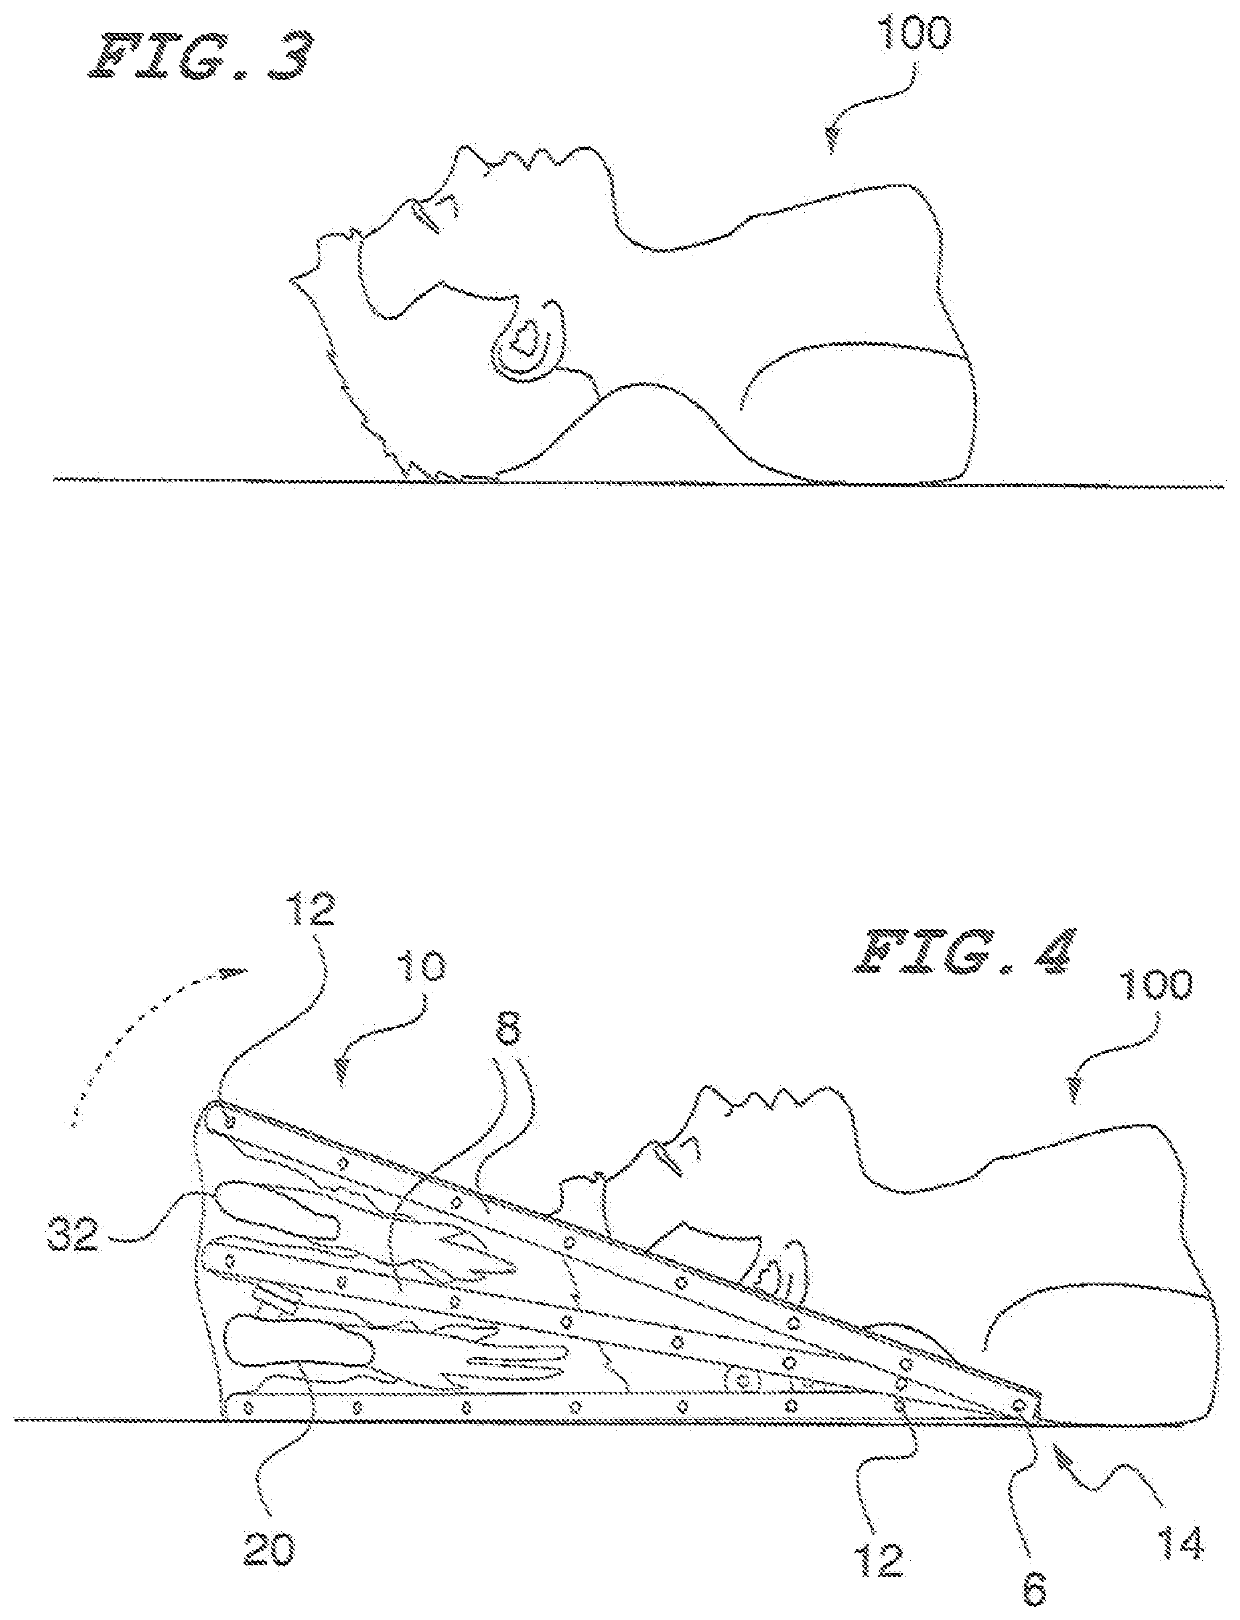 Patient airway dome and methods of making and using same